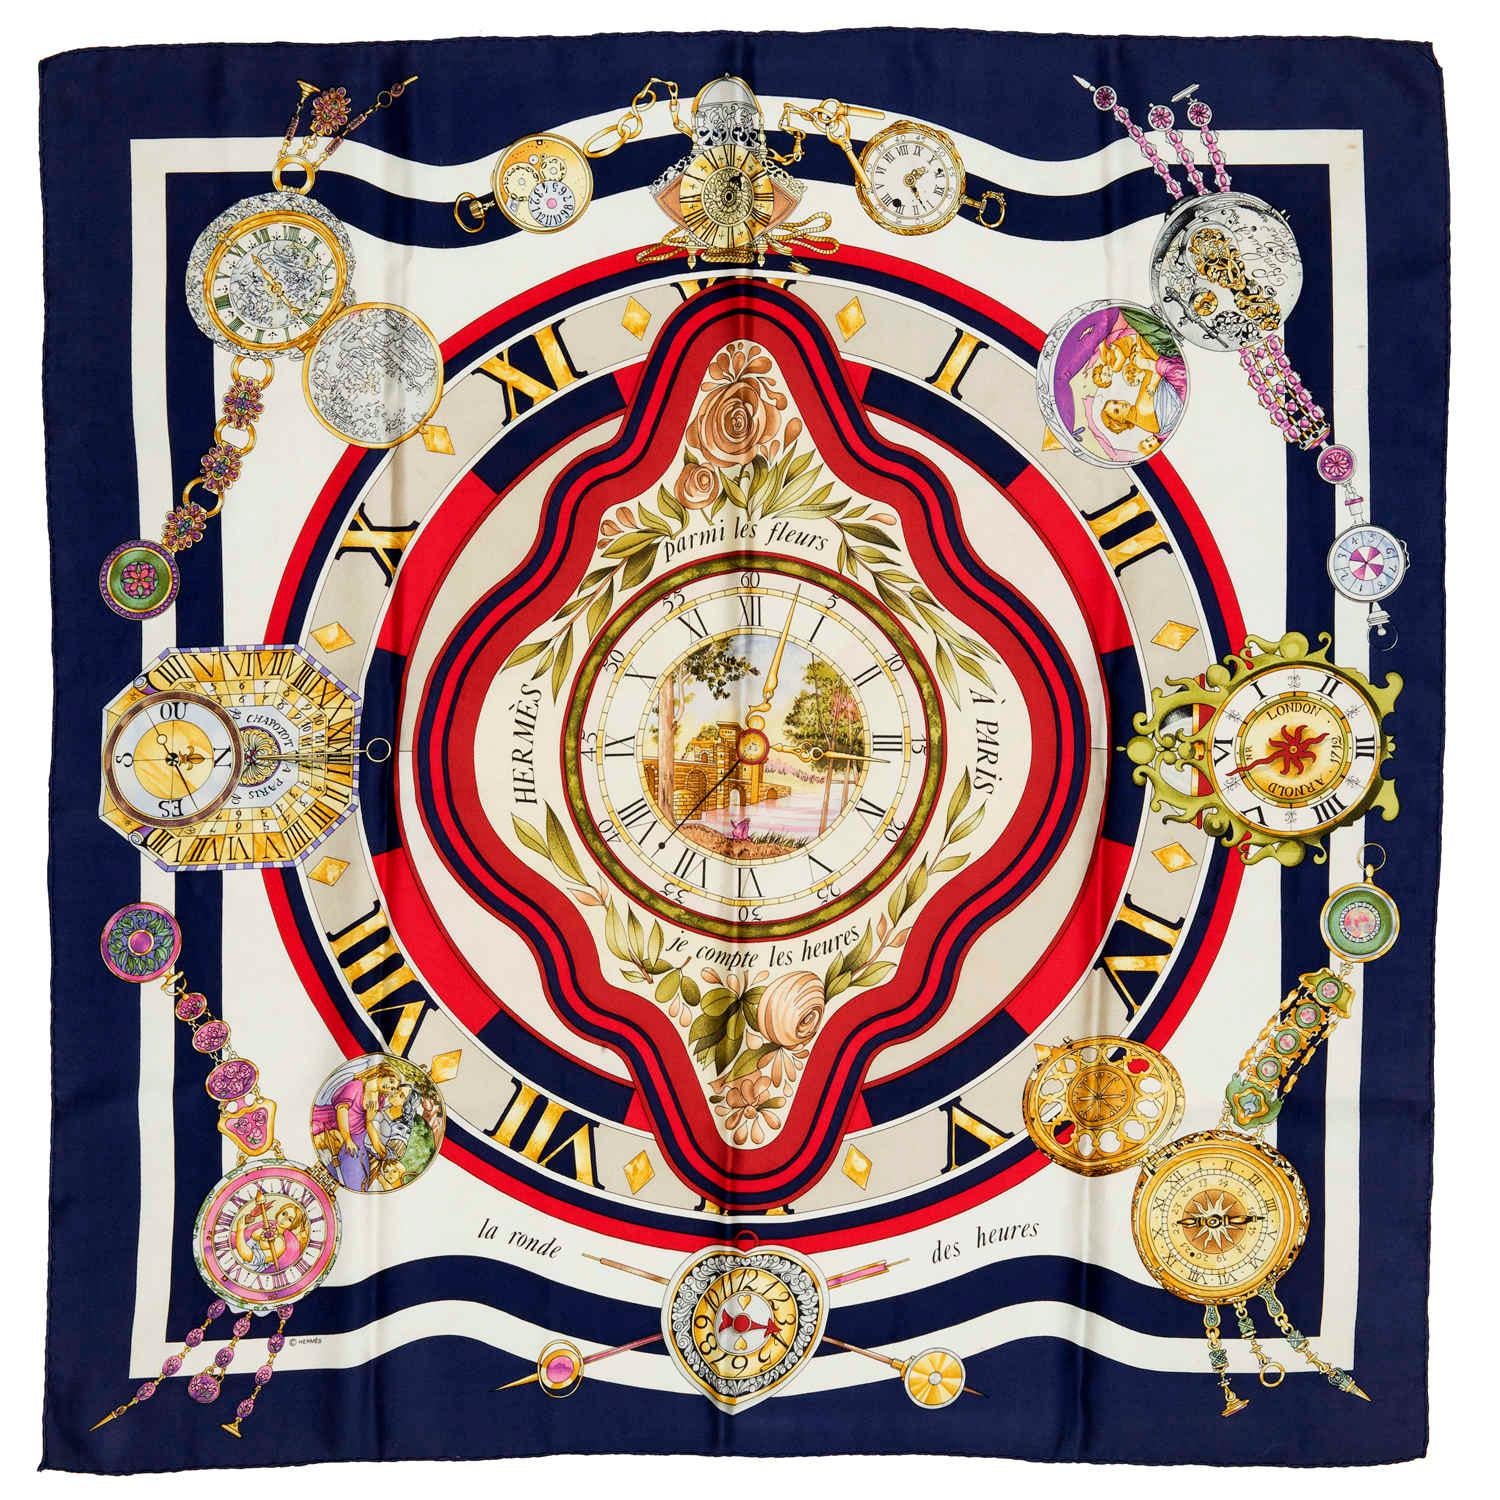 'La Ronde des Heures' - a classic Hermes Silk Scarf designed by Loic Dubigeon in 2000. This rare Hermes 'Millennium'  celebration scarf is in sumptuous colours with a Navy Blue Border with Gold & Grey Ground.